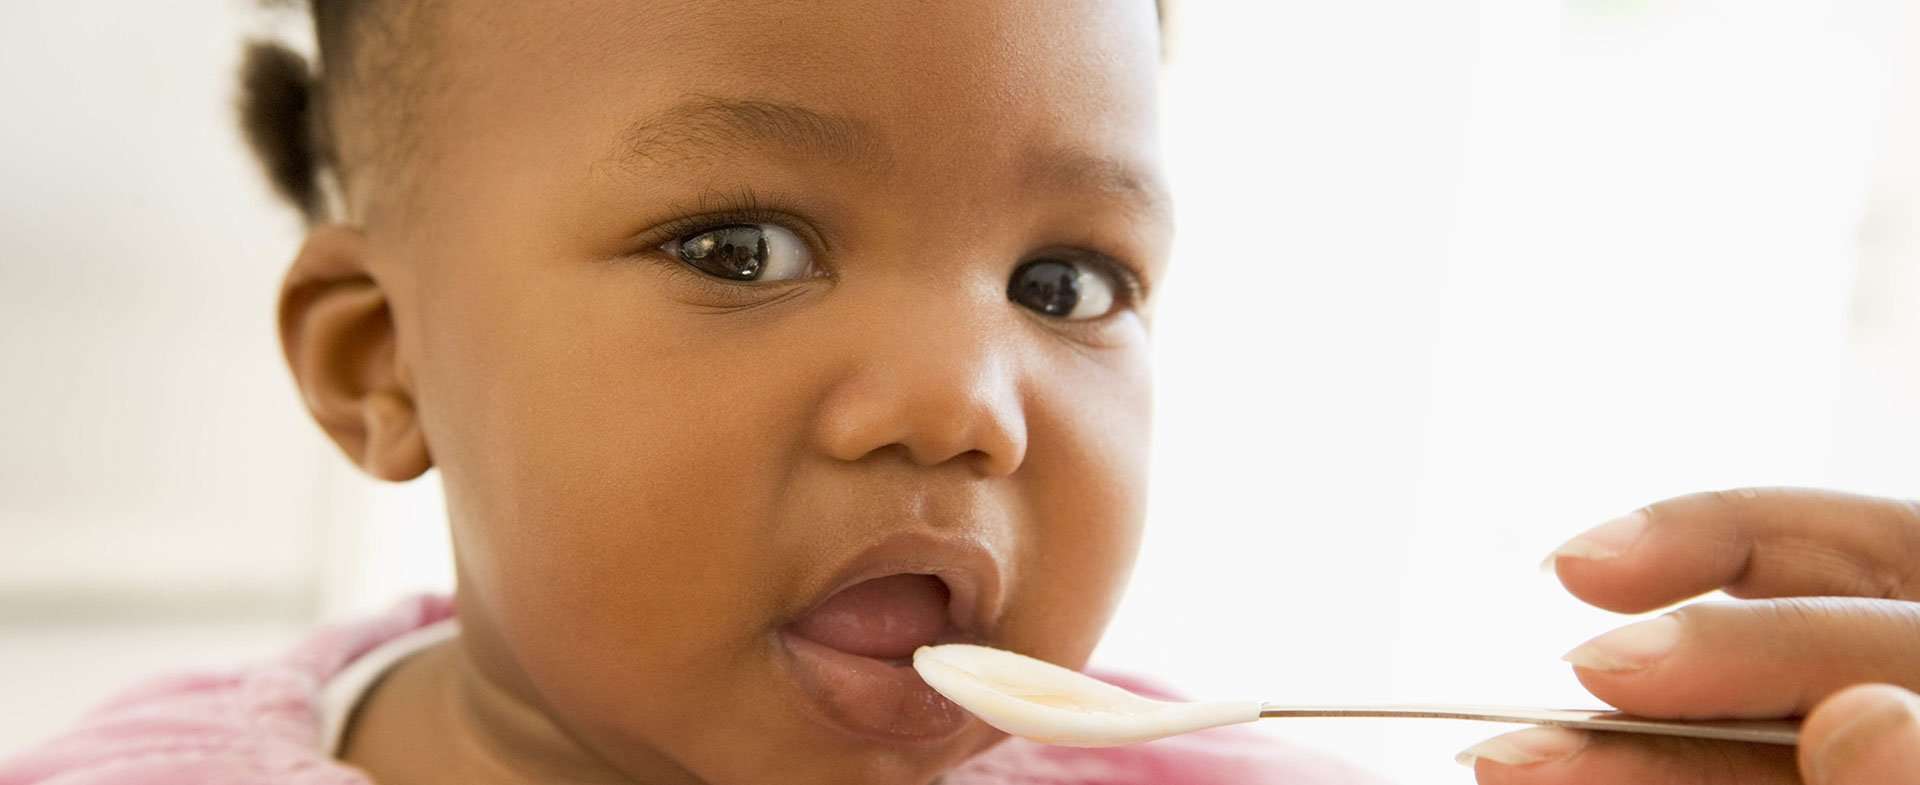 New Study Finds Babies Should Consume Peanut Products ...